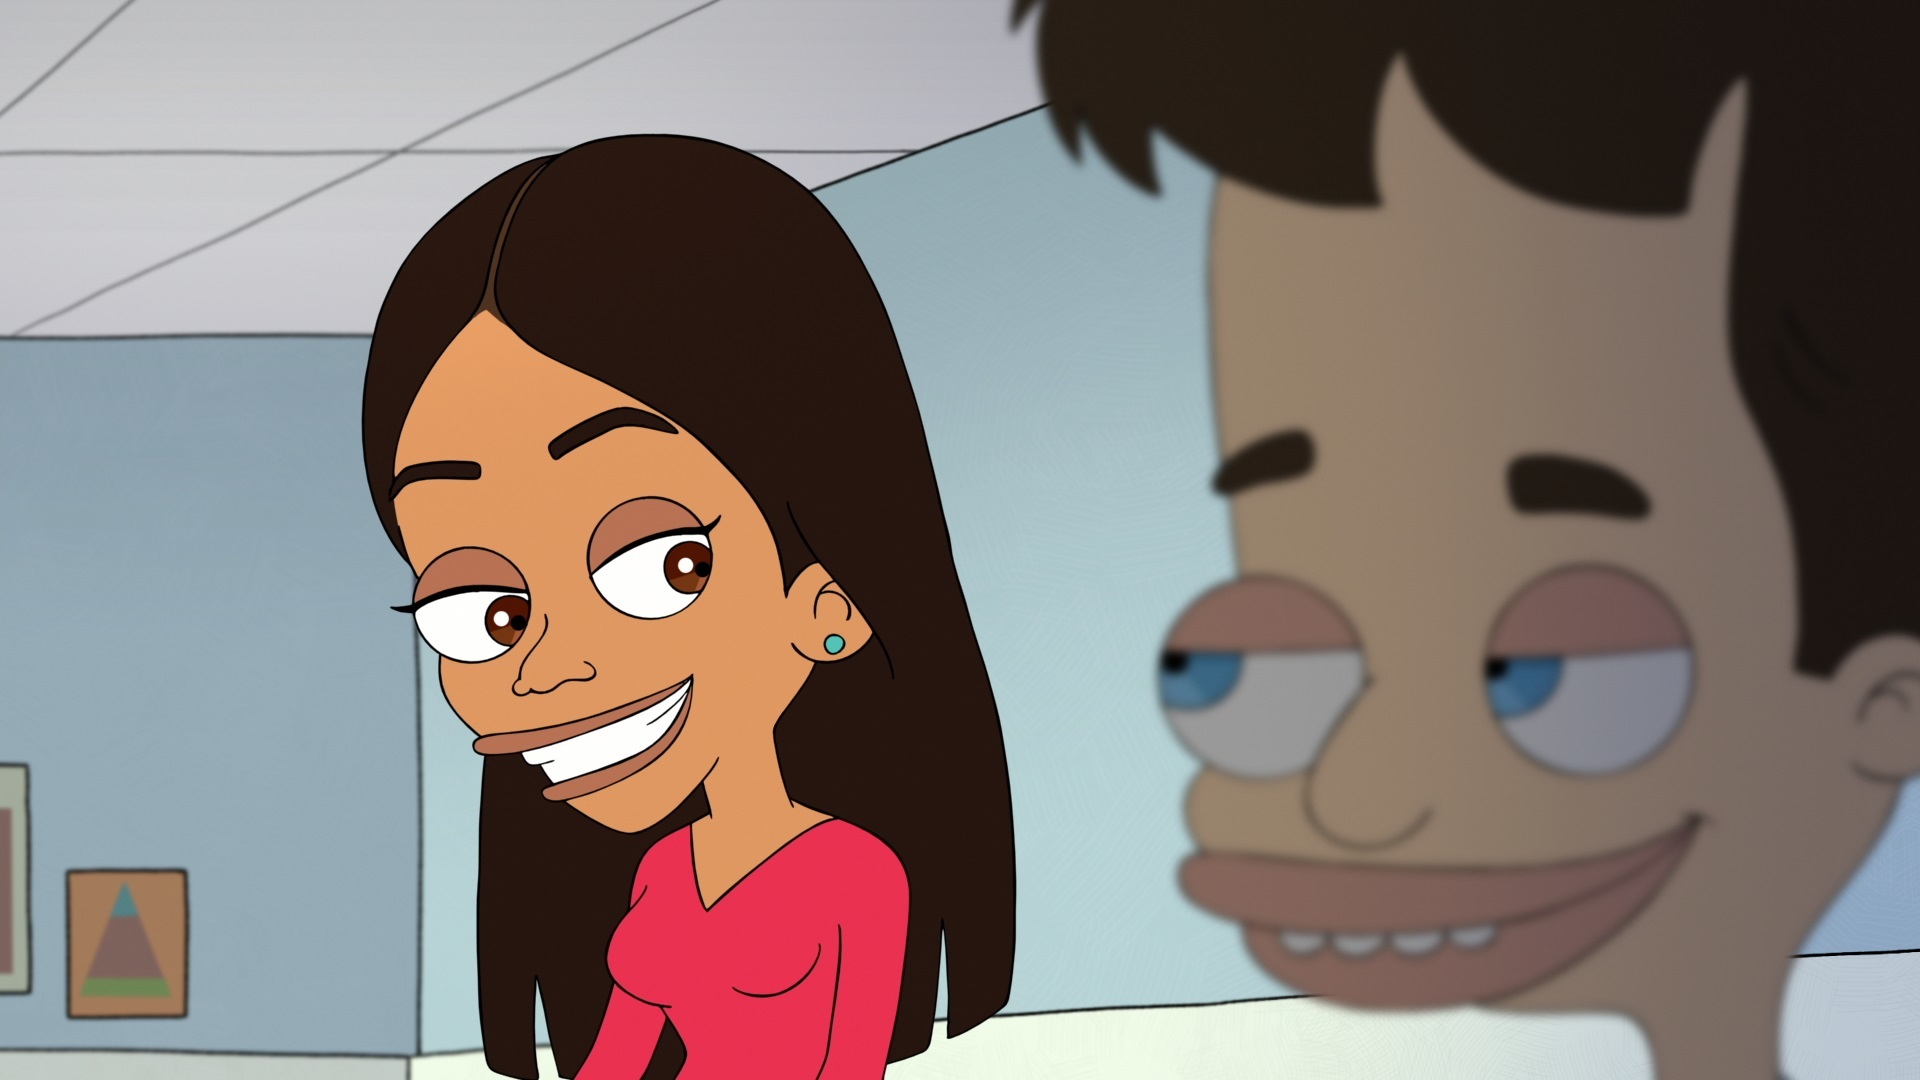 TV Show Big Mouth HD Wallpaper | Background Image